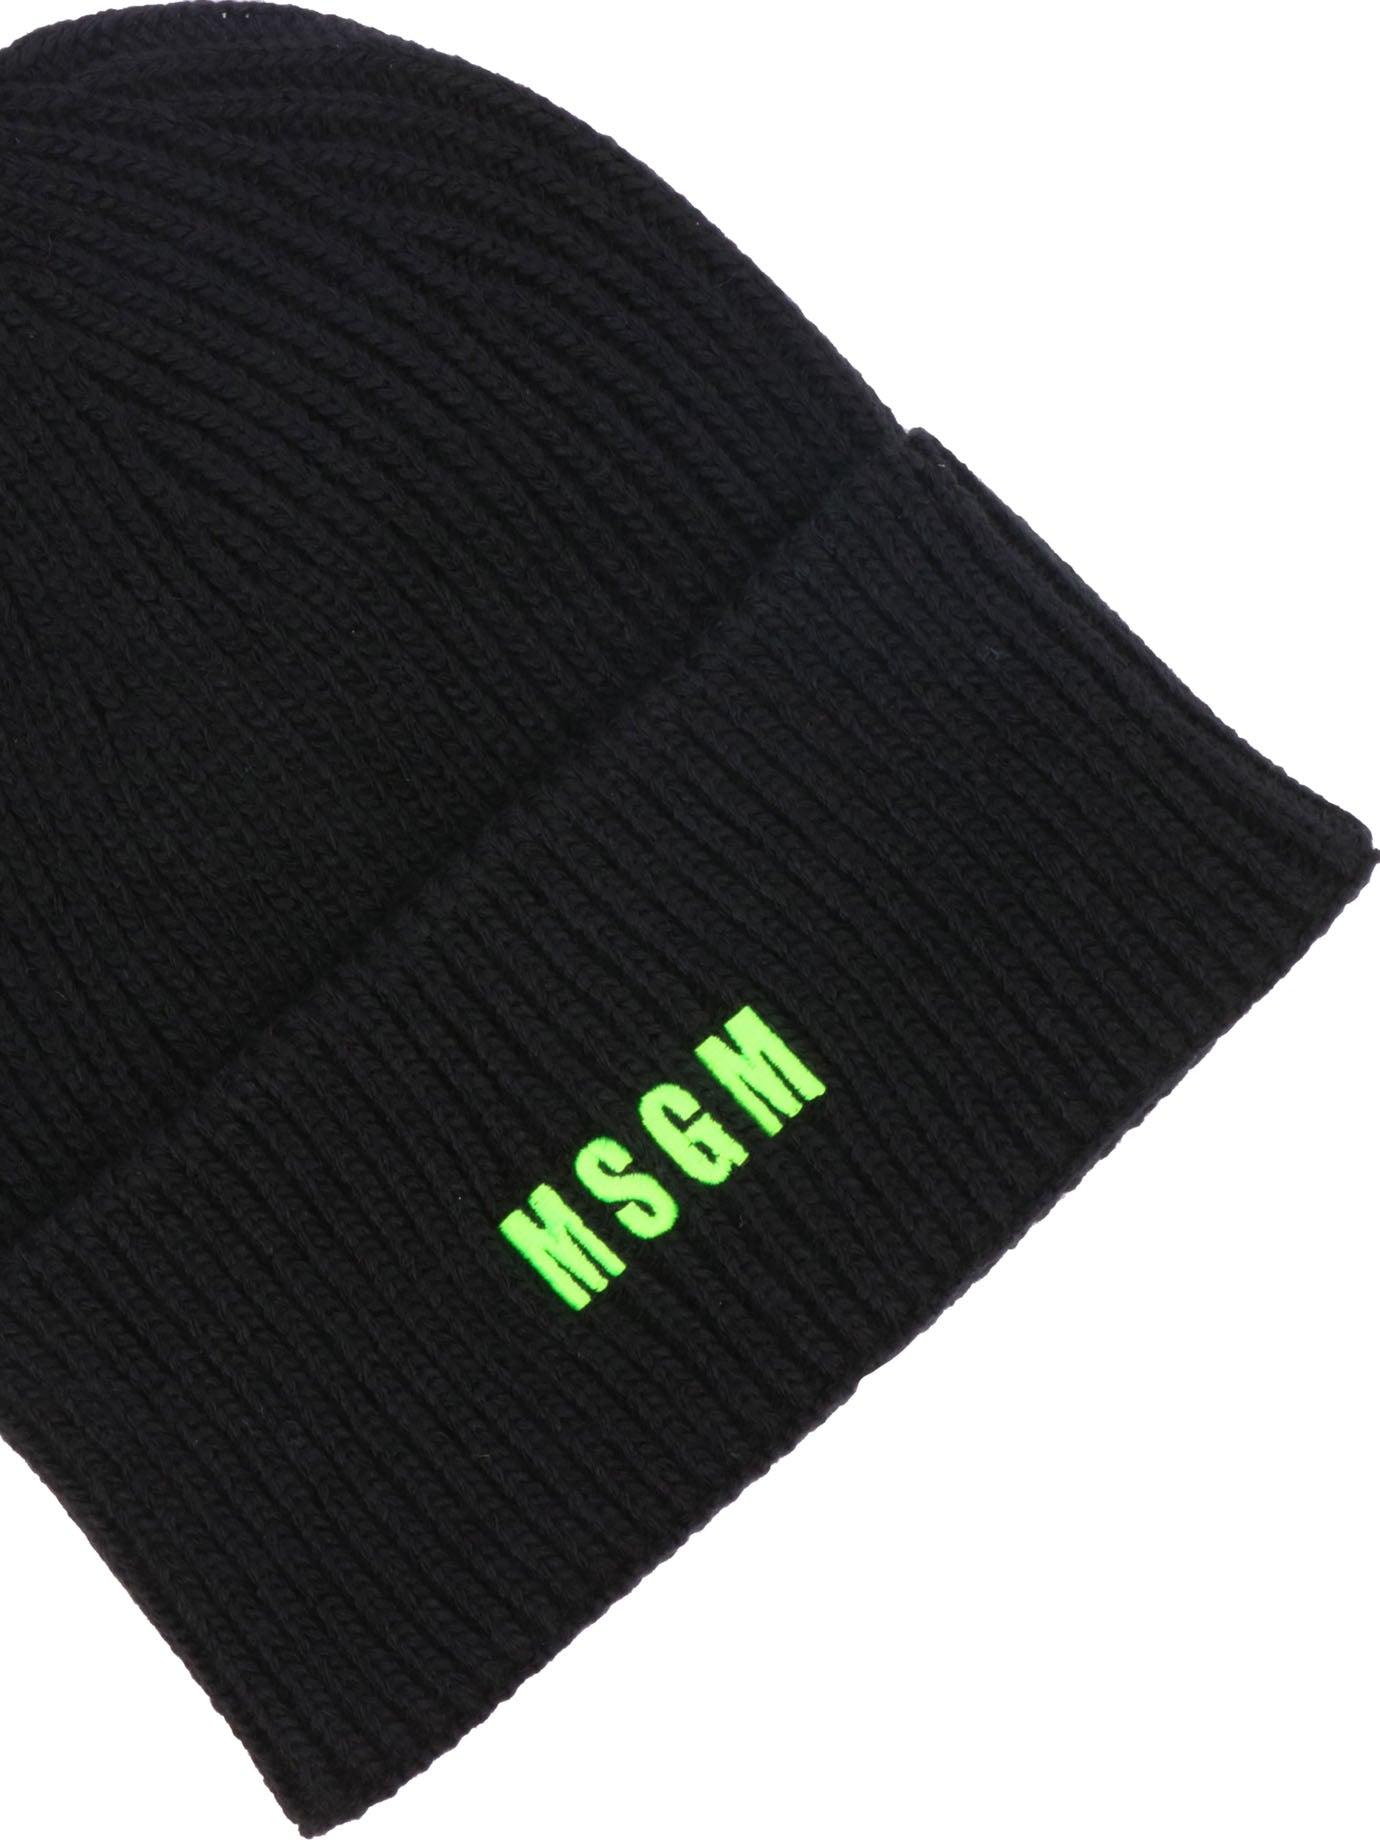 MSGM Wool Beanie Hat With Logo in Black for Men Mens Hats MSGM Hats Save 28% 